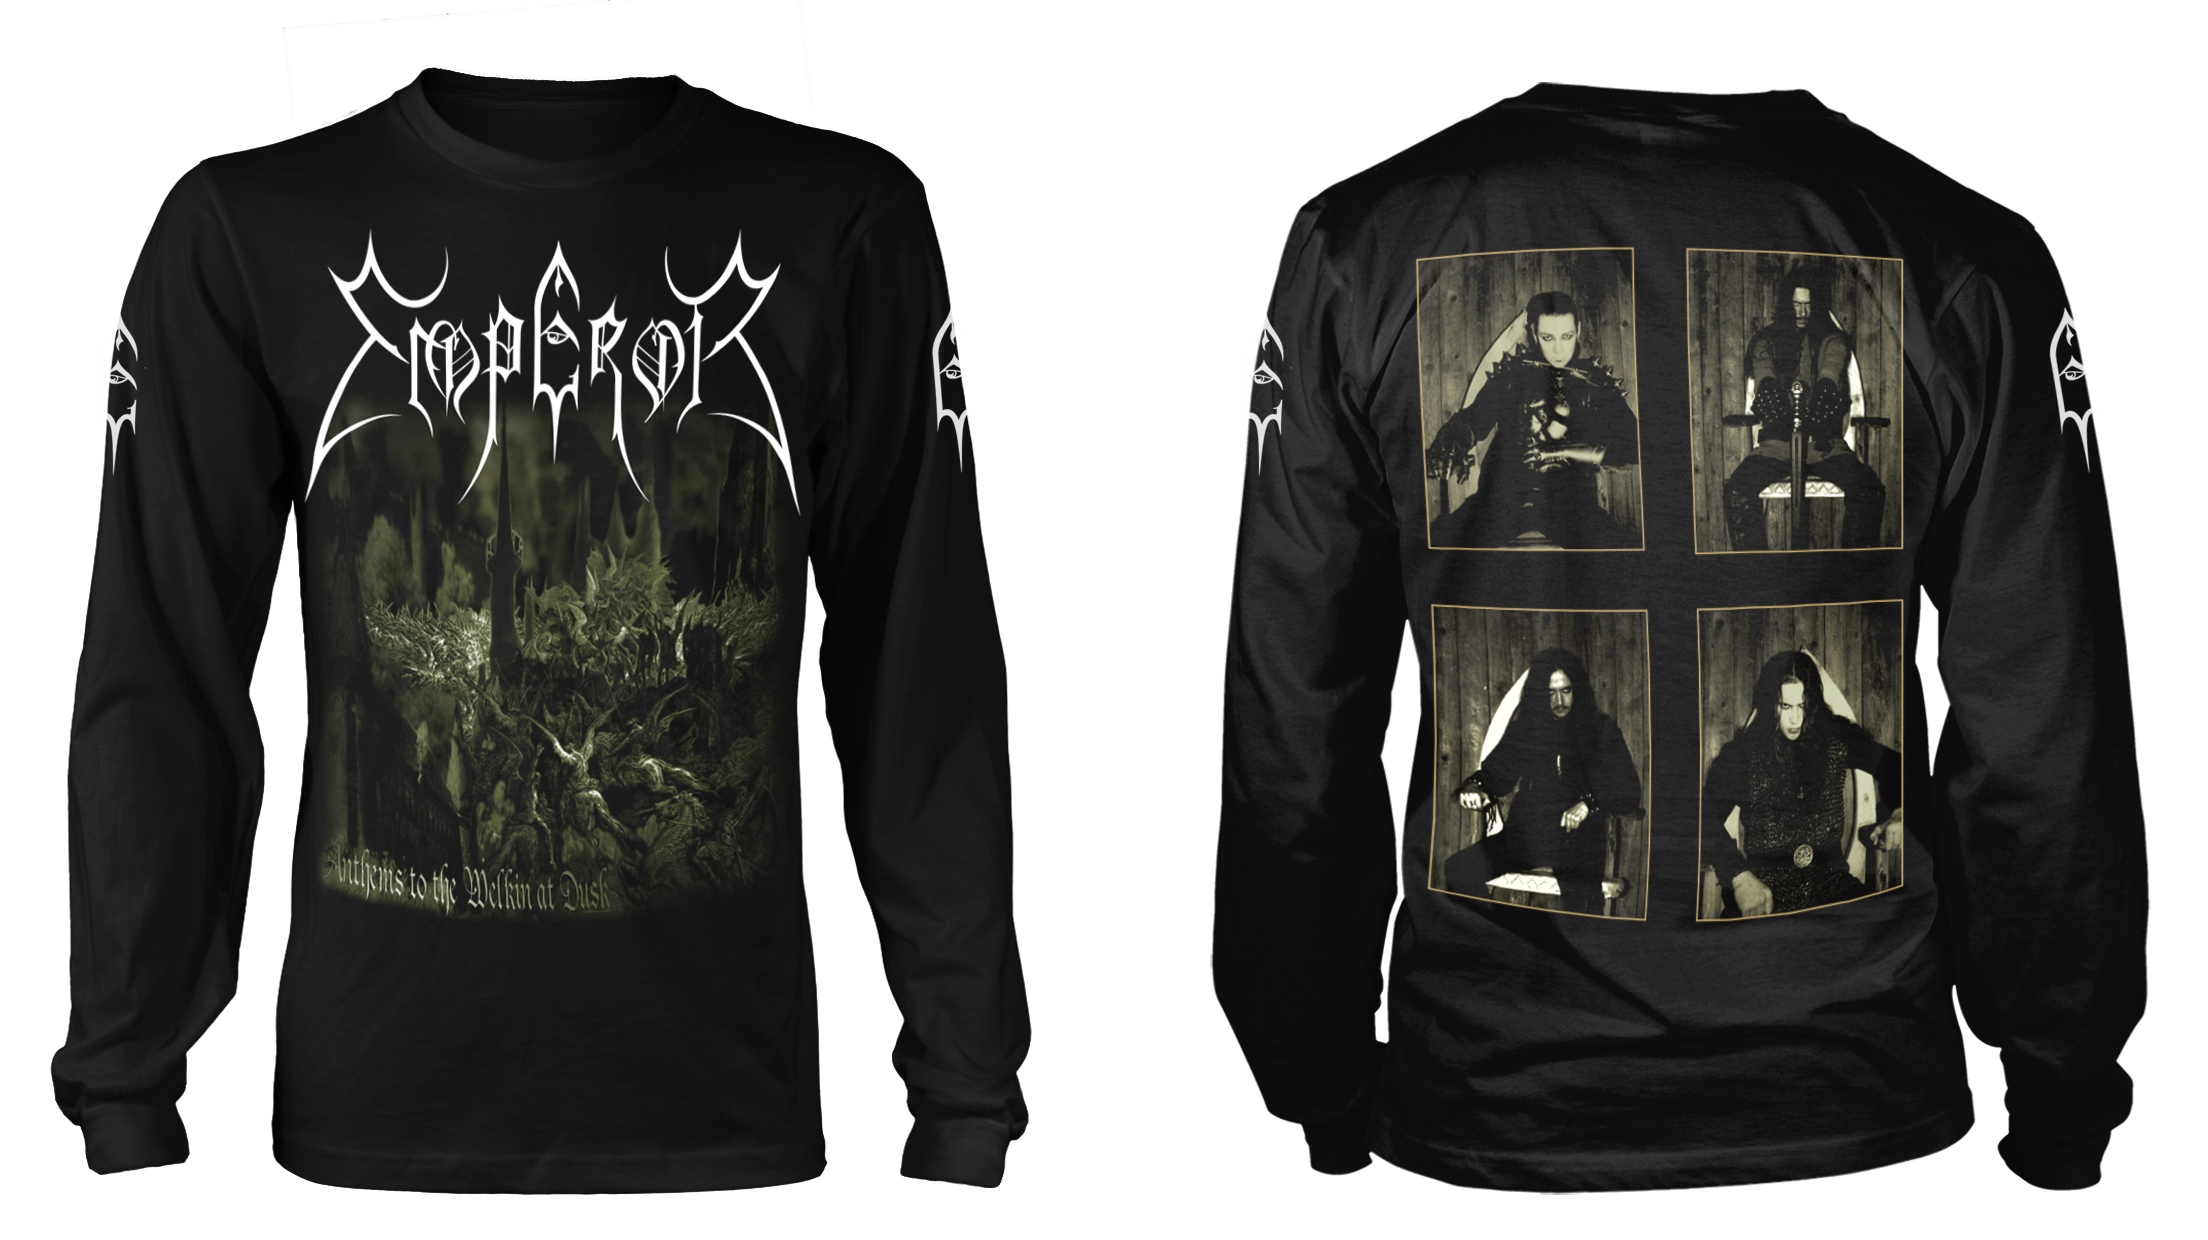 Emperor 'Anthems To The Welkin At Dusk' Long Sleeve Shirt - NEW & OFFICIAL | eBay